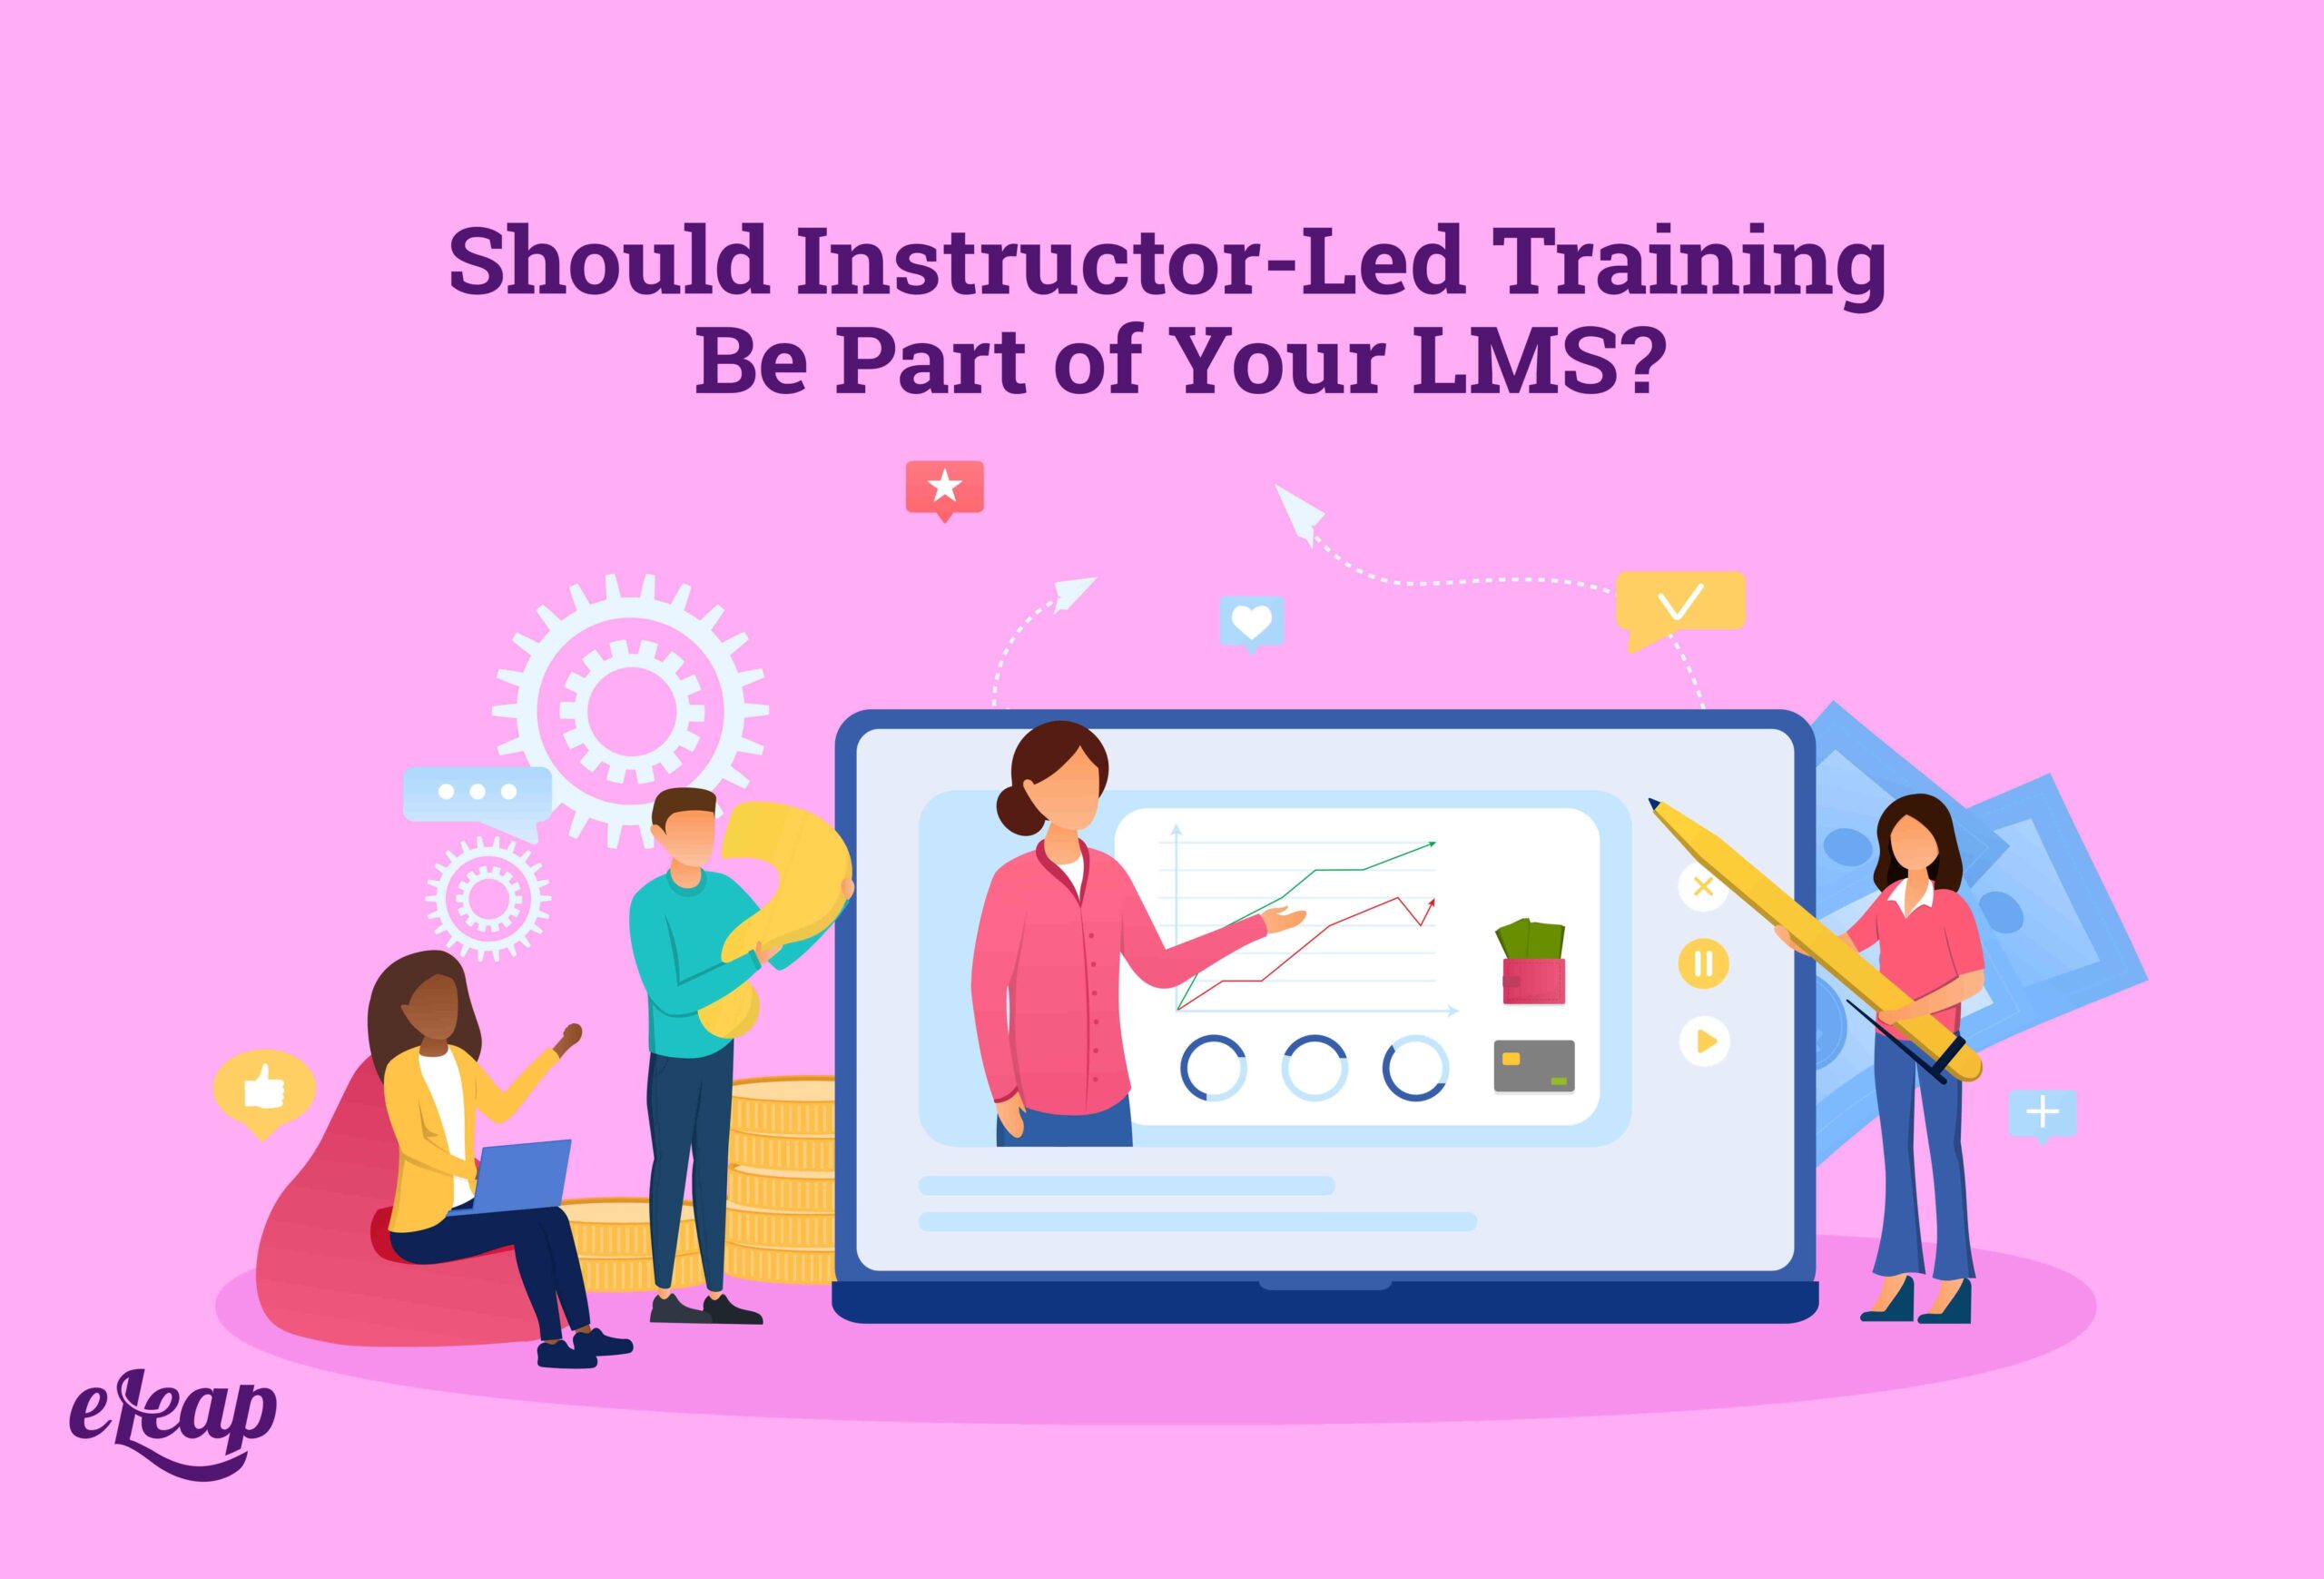 Should Instructor-Led Training Be Part of Your LMS?